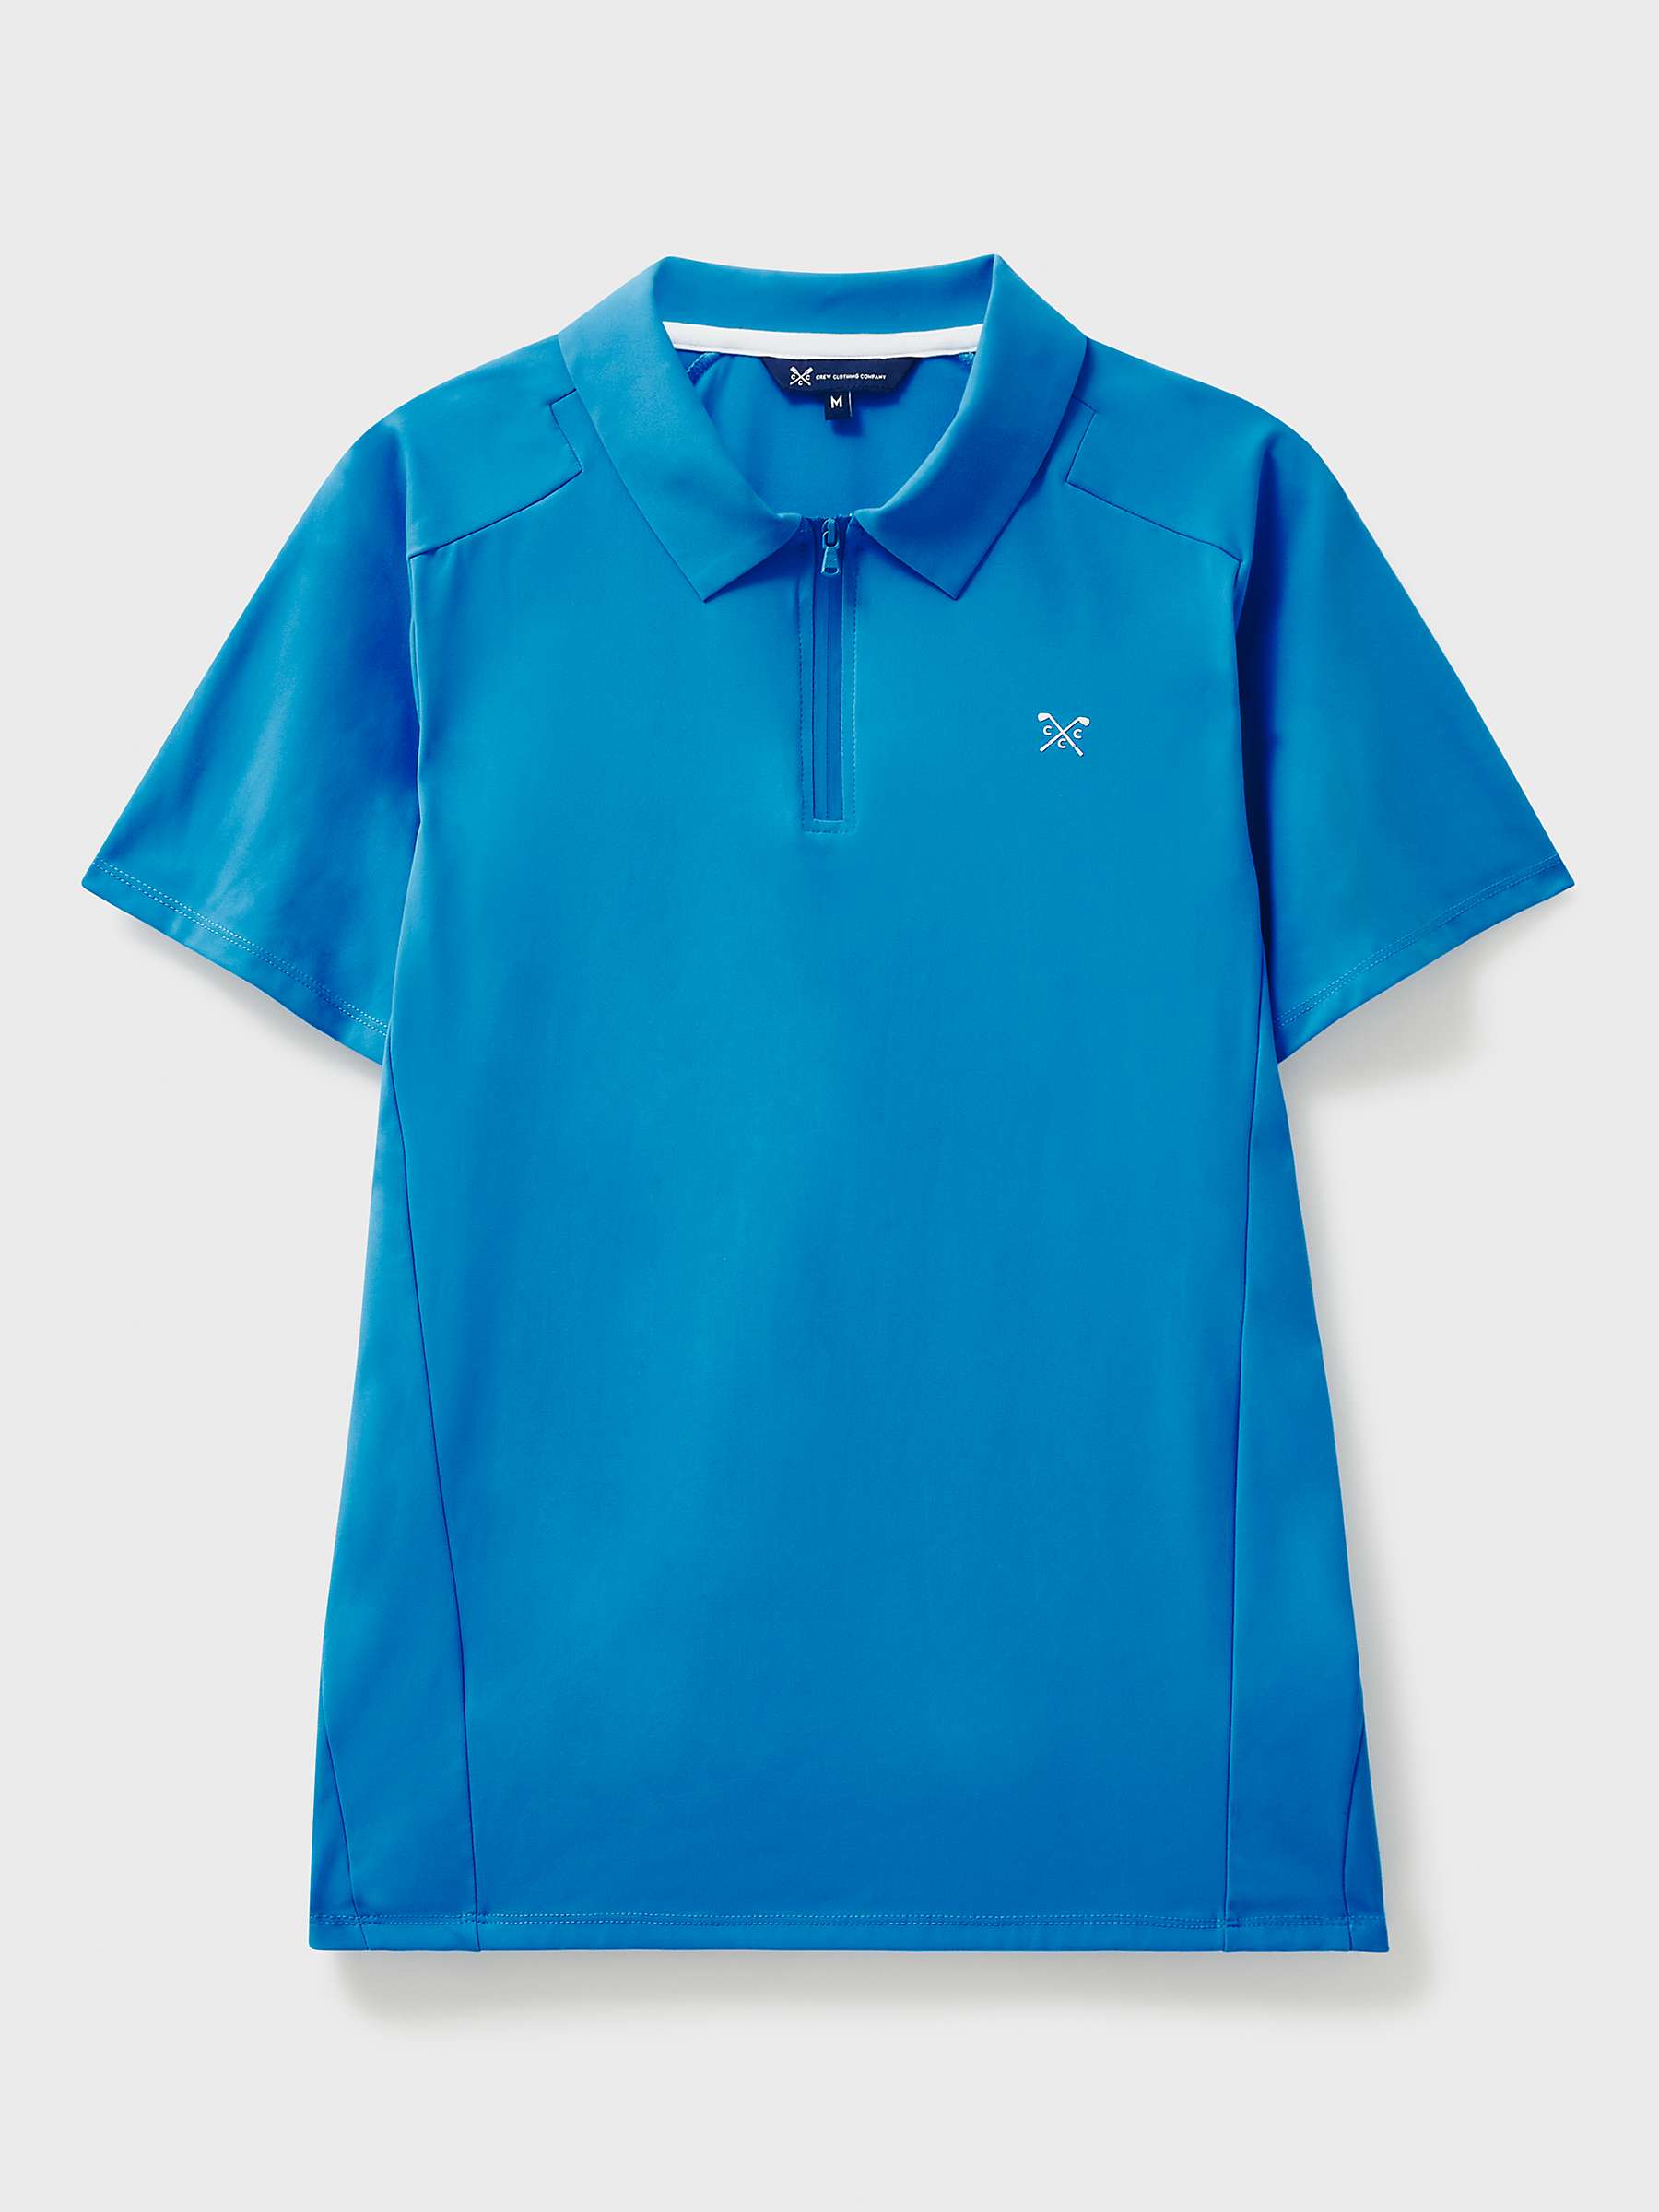 Buy Crew Clothing Champion Golf Polo Shirt, Blue Online at johnlewis.com